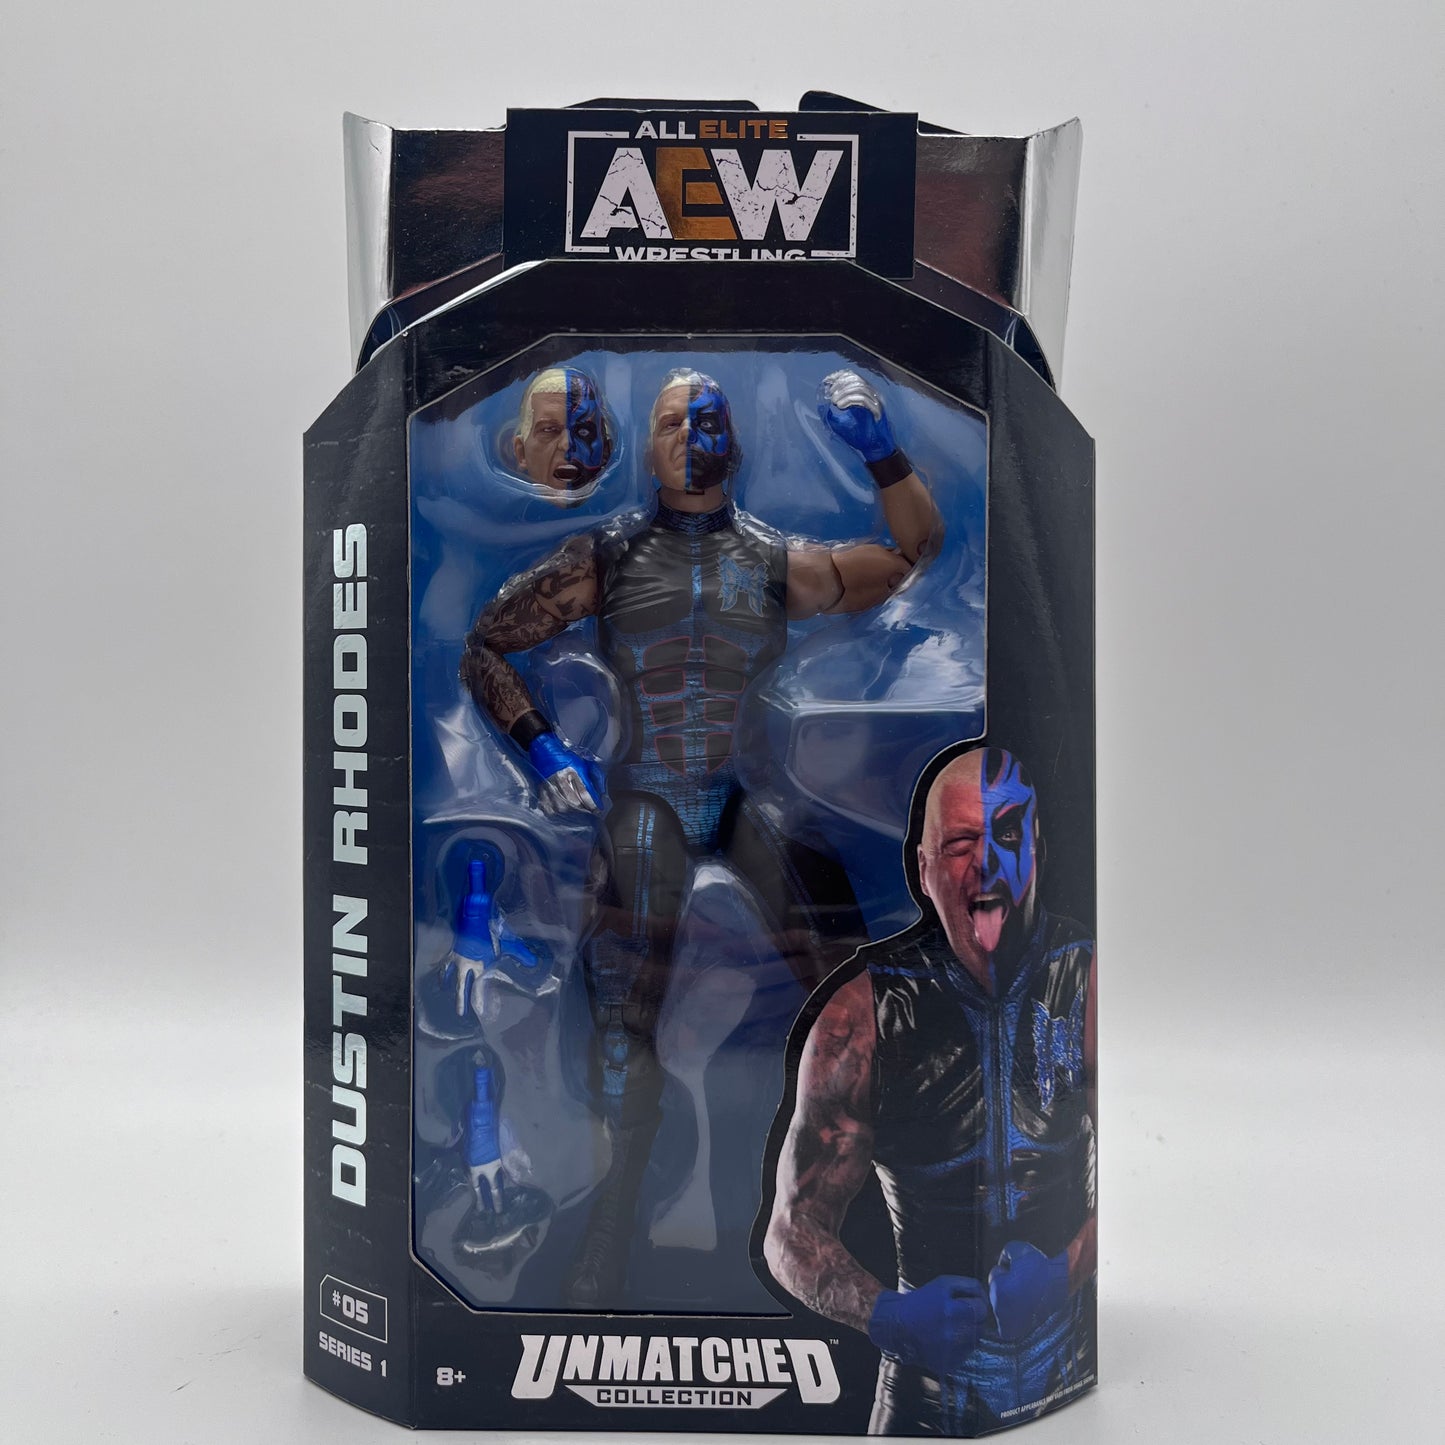 ADW Unmatched Collection Series 1 #5 Dustin Rhodes